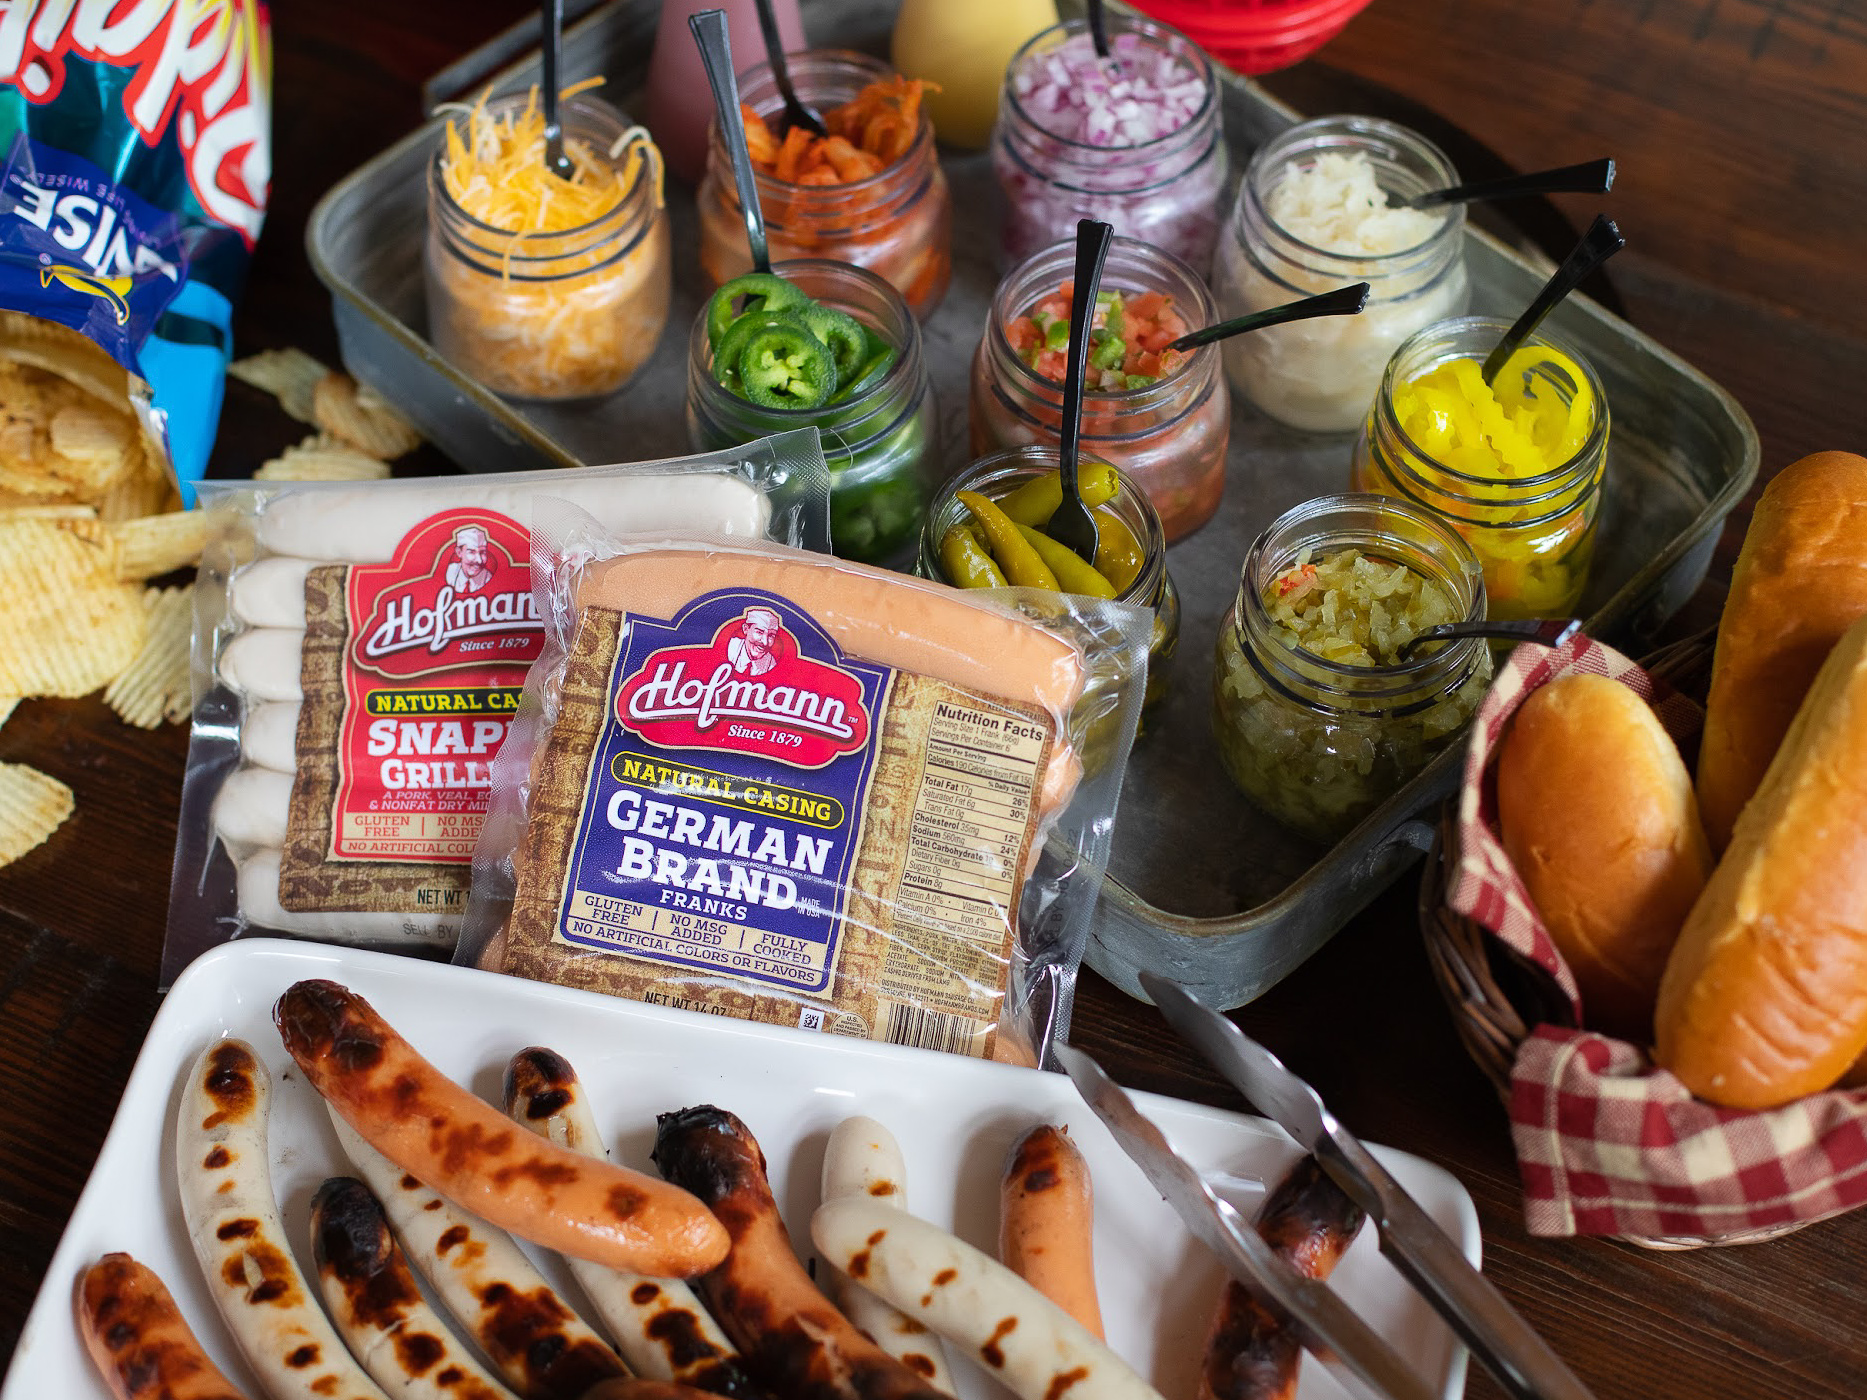 Grab Delicious Hofmann Hot Dogs & Celebrate The 4th Of July With Great Taste!